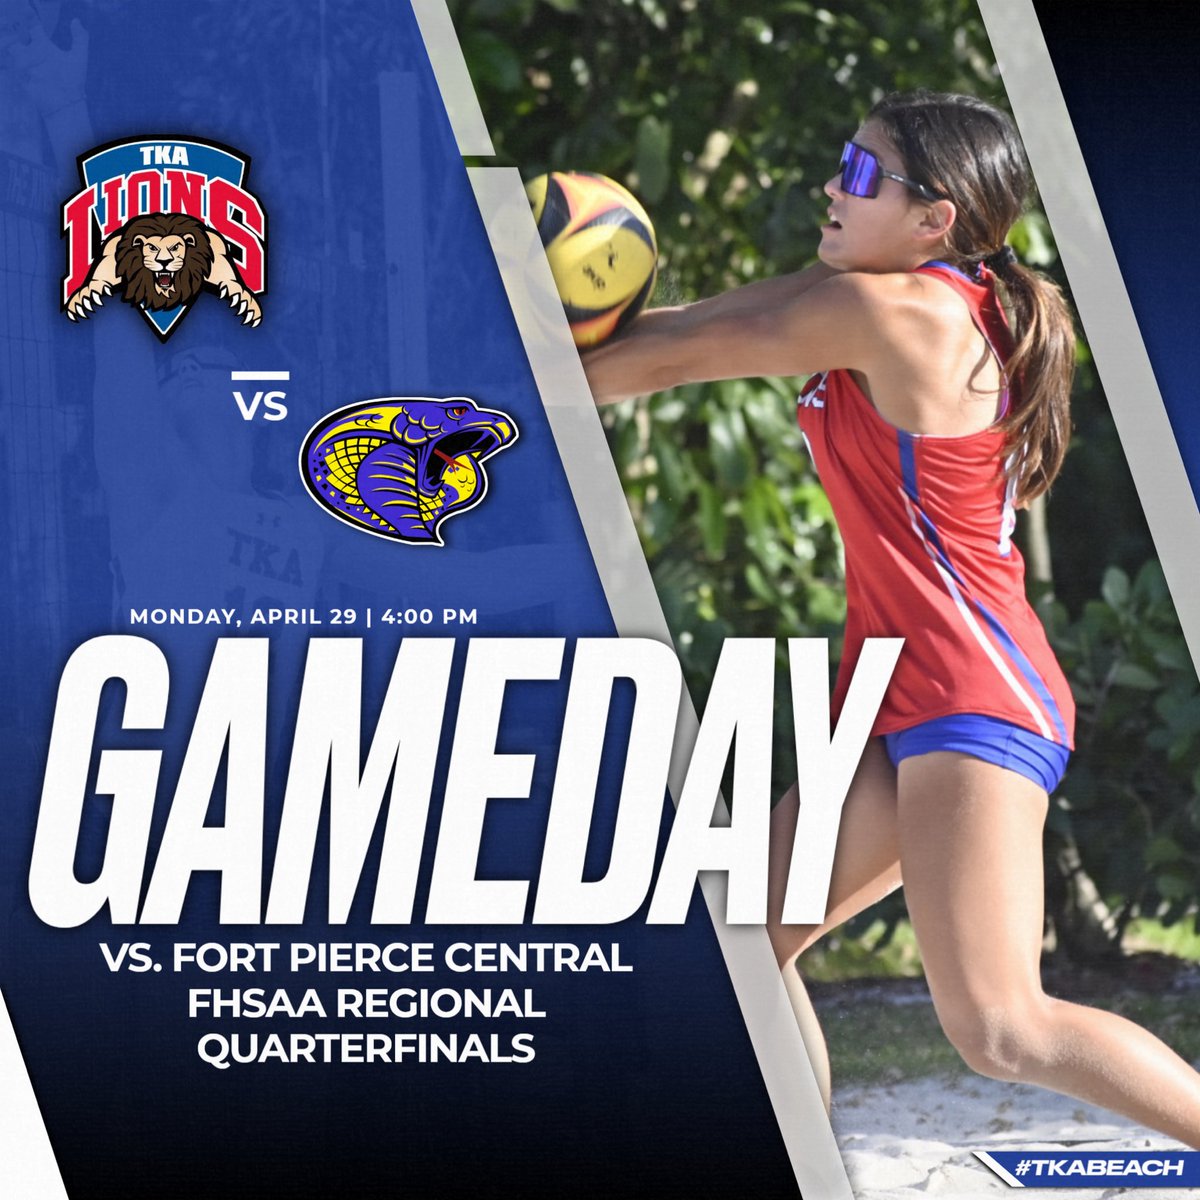 The Lions host Fort Pierce Central today at 4 pm in the regional quarterfinals. Come out and support the girls as they try to make another run to state! #tkabeach 🏐 @TKAWPB @pbphighschools @ESPNWestPalm